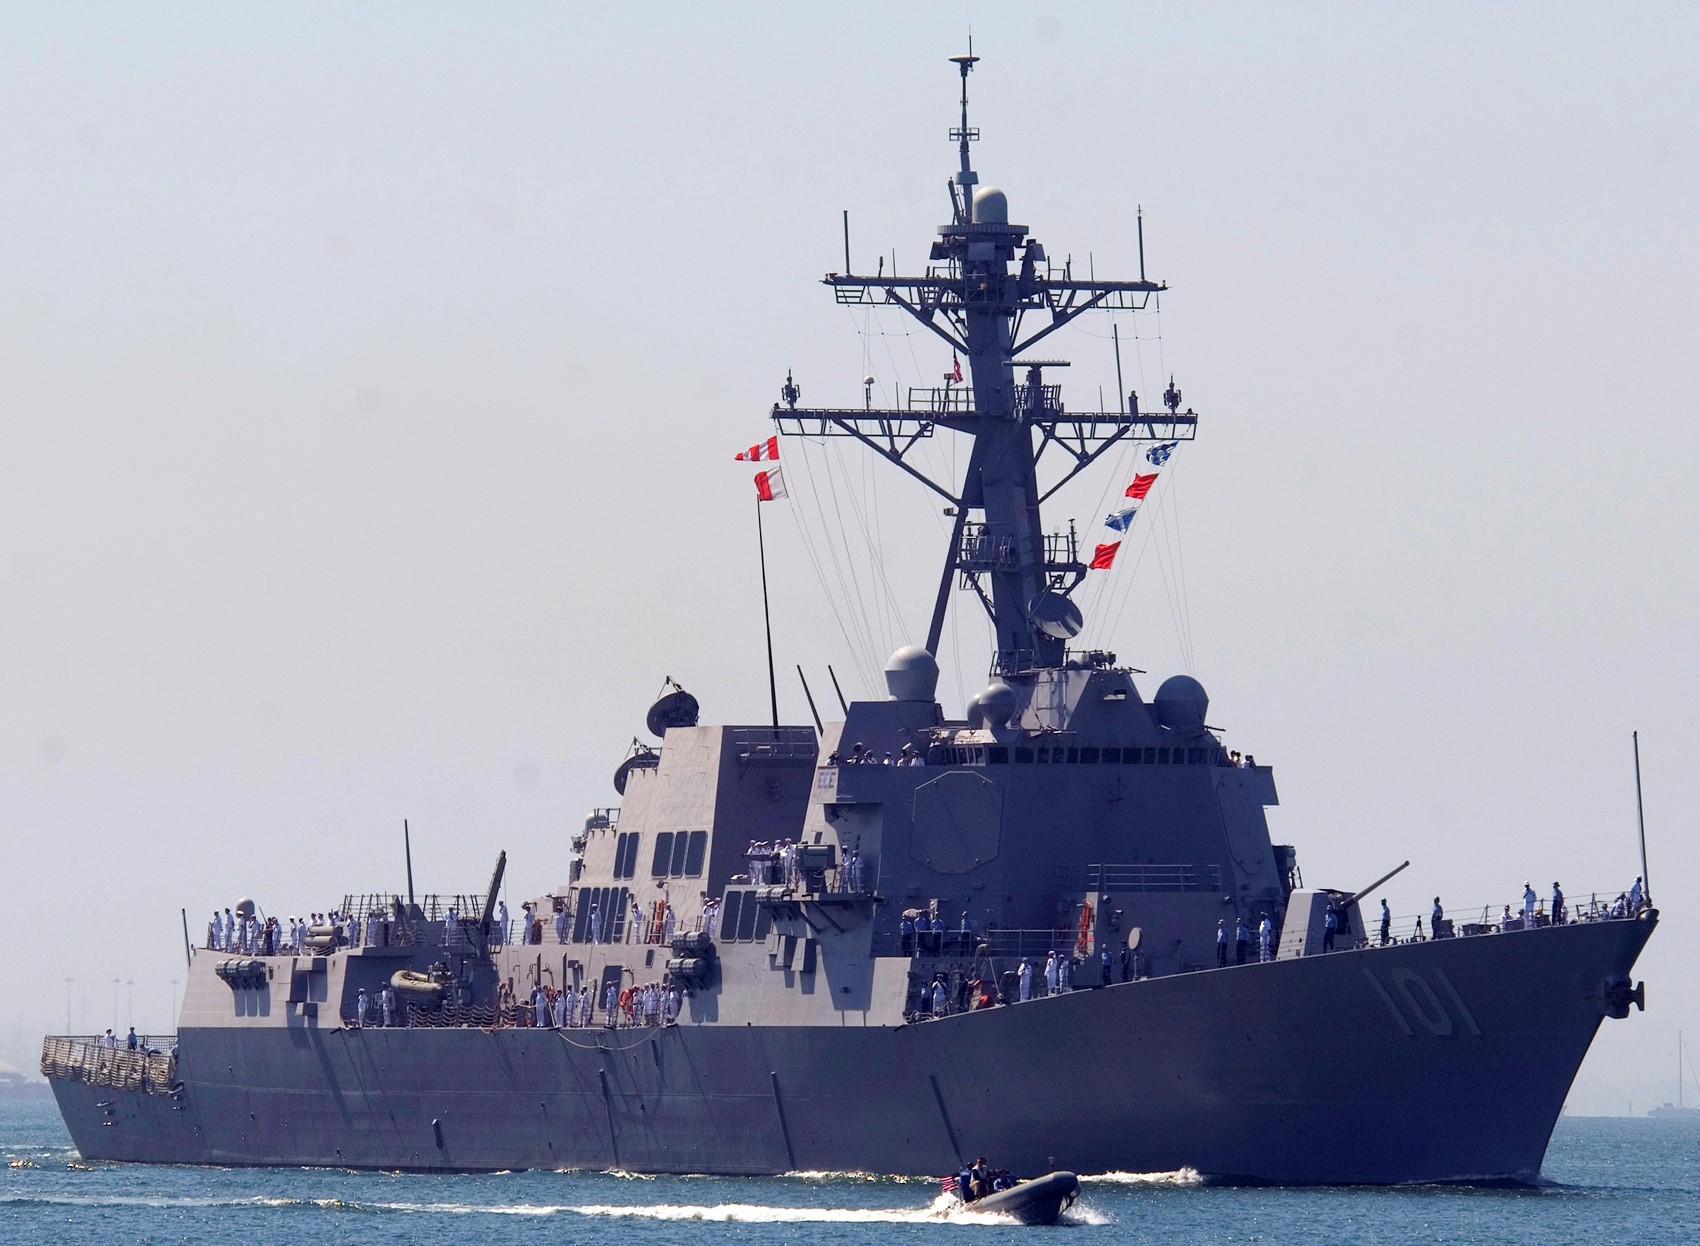 ddg-101 uss gridley arleigh burke class guided missile destroyer aegis us navy 42